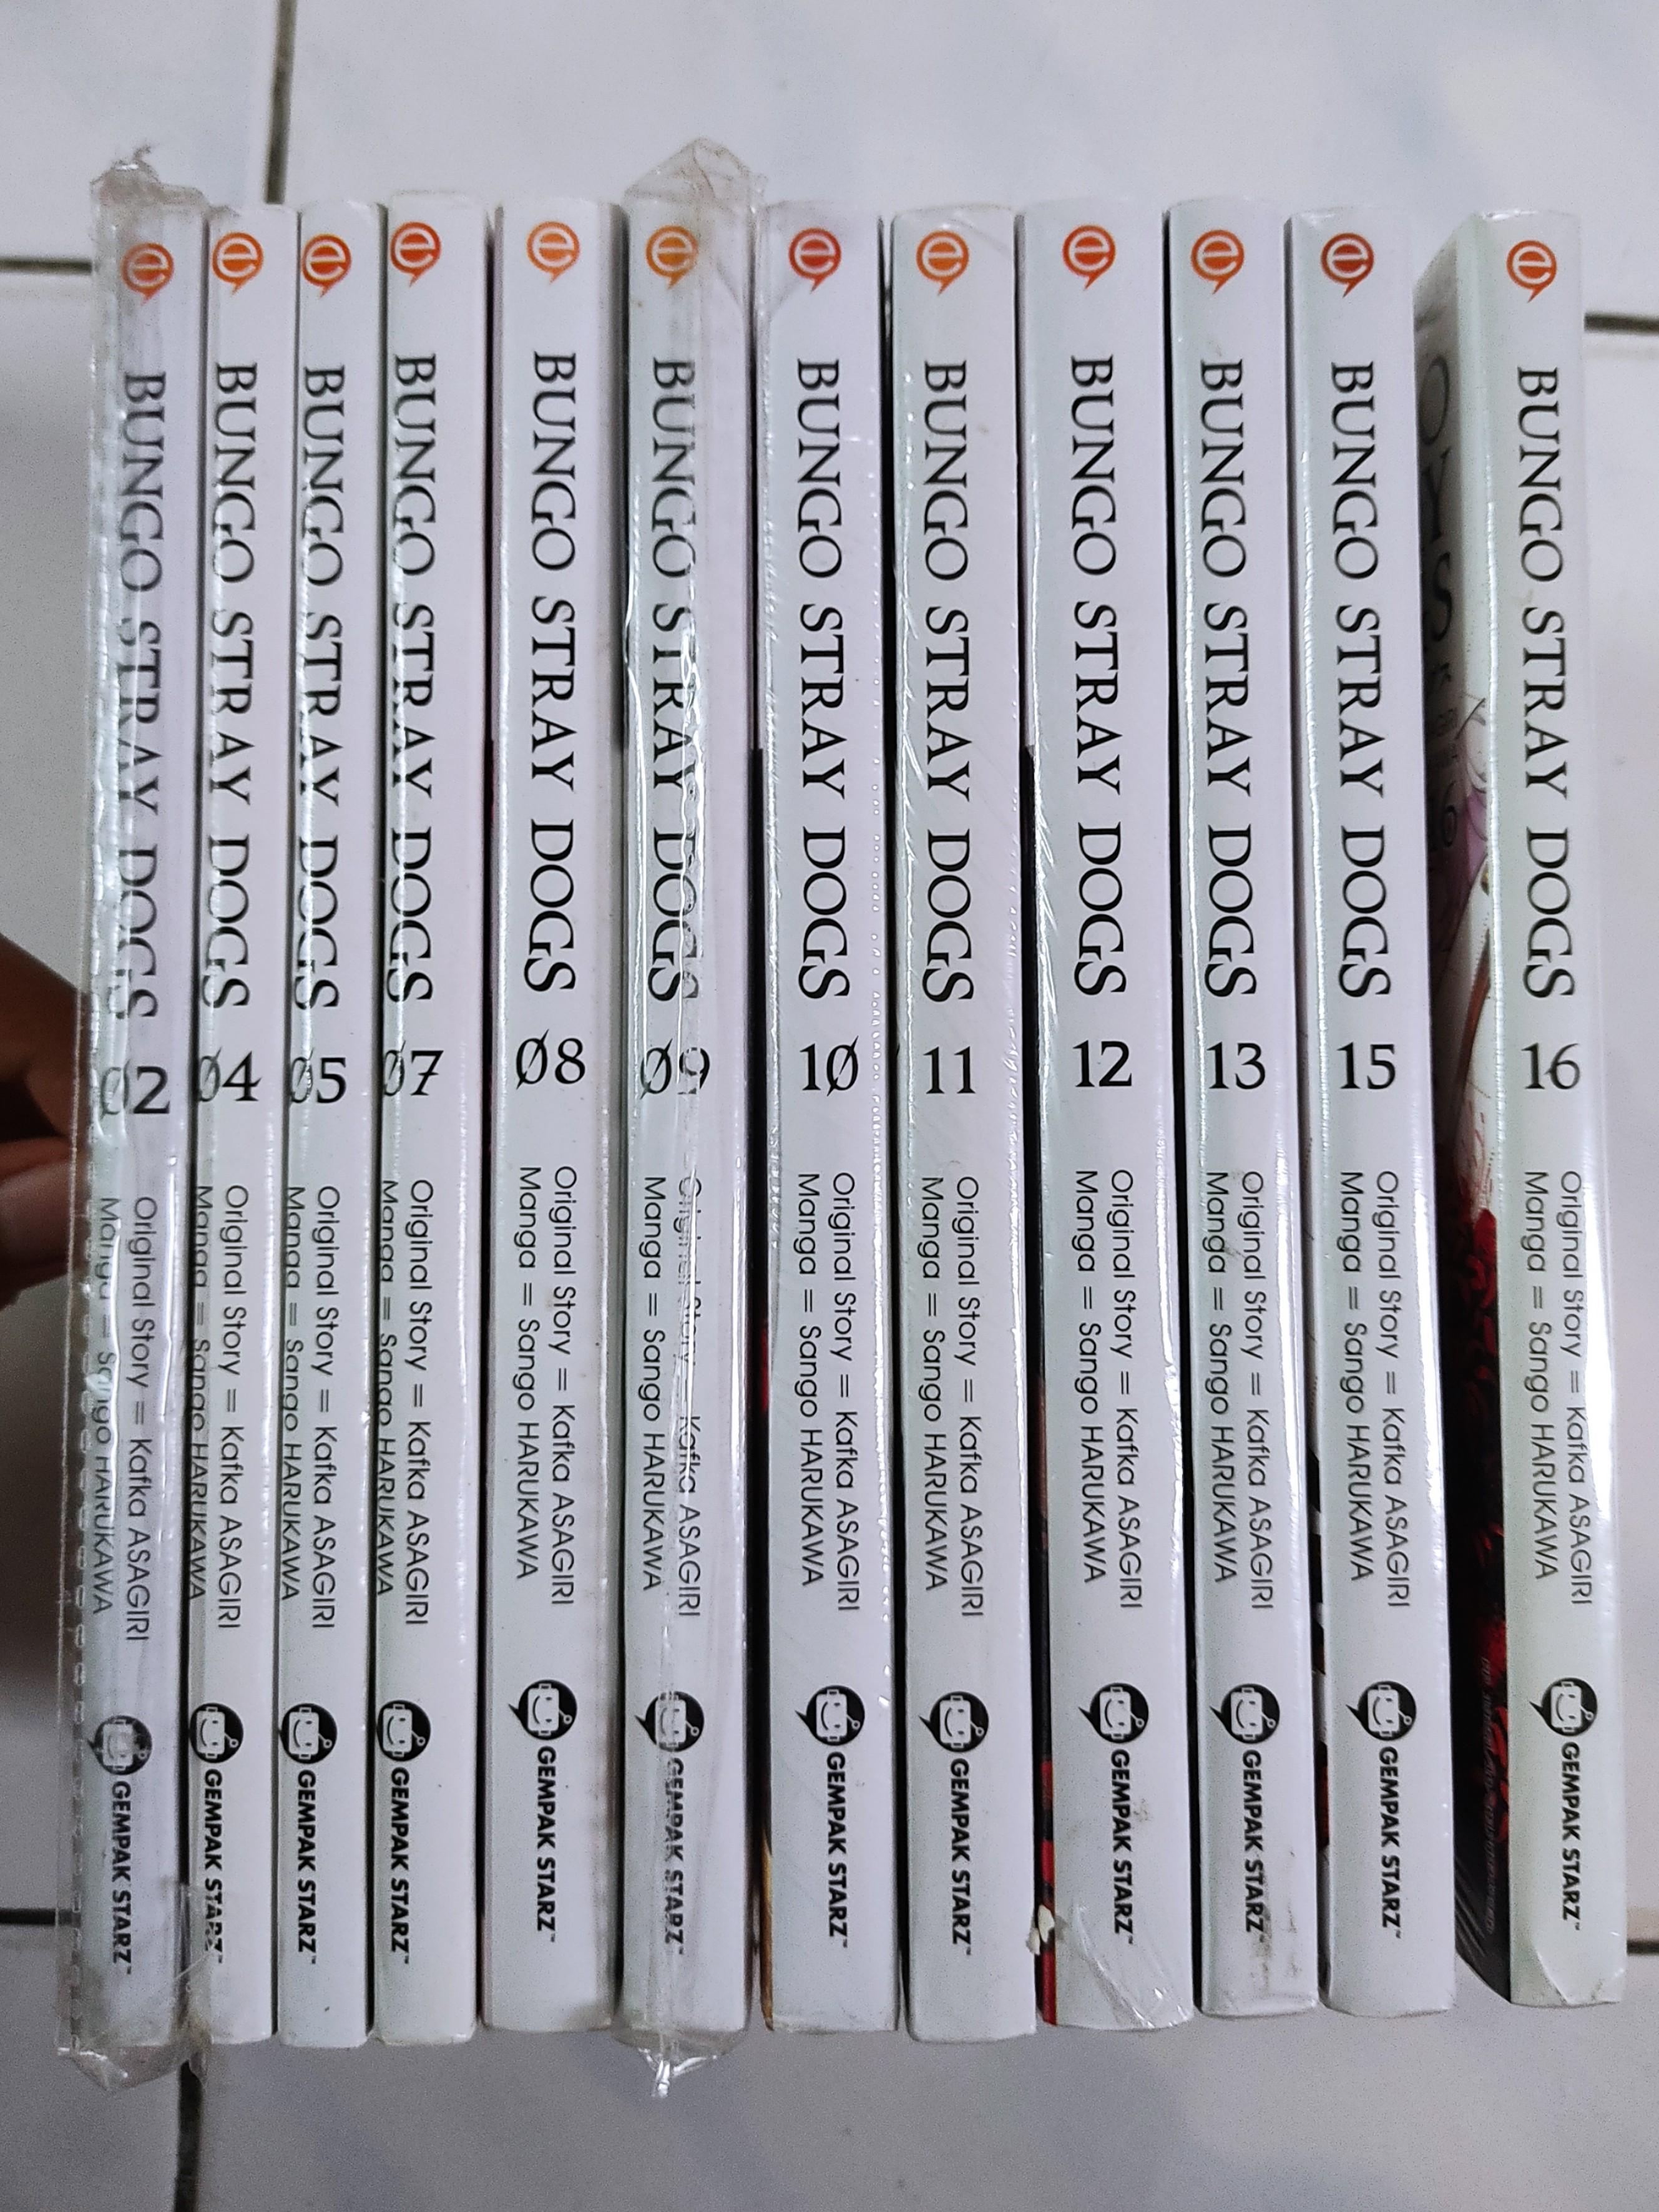 My First Manga Set! I've Always Wanted to Buy Manga, So What Better Series  to Buy Than Bungo Stray Dogs? : r/BungouStrayDogs